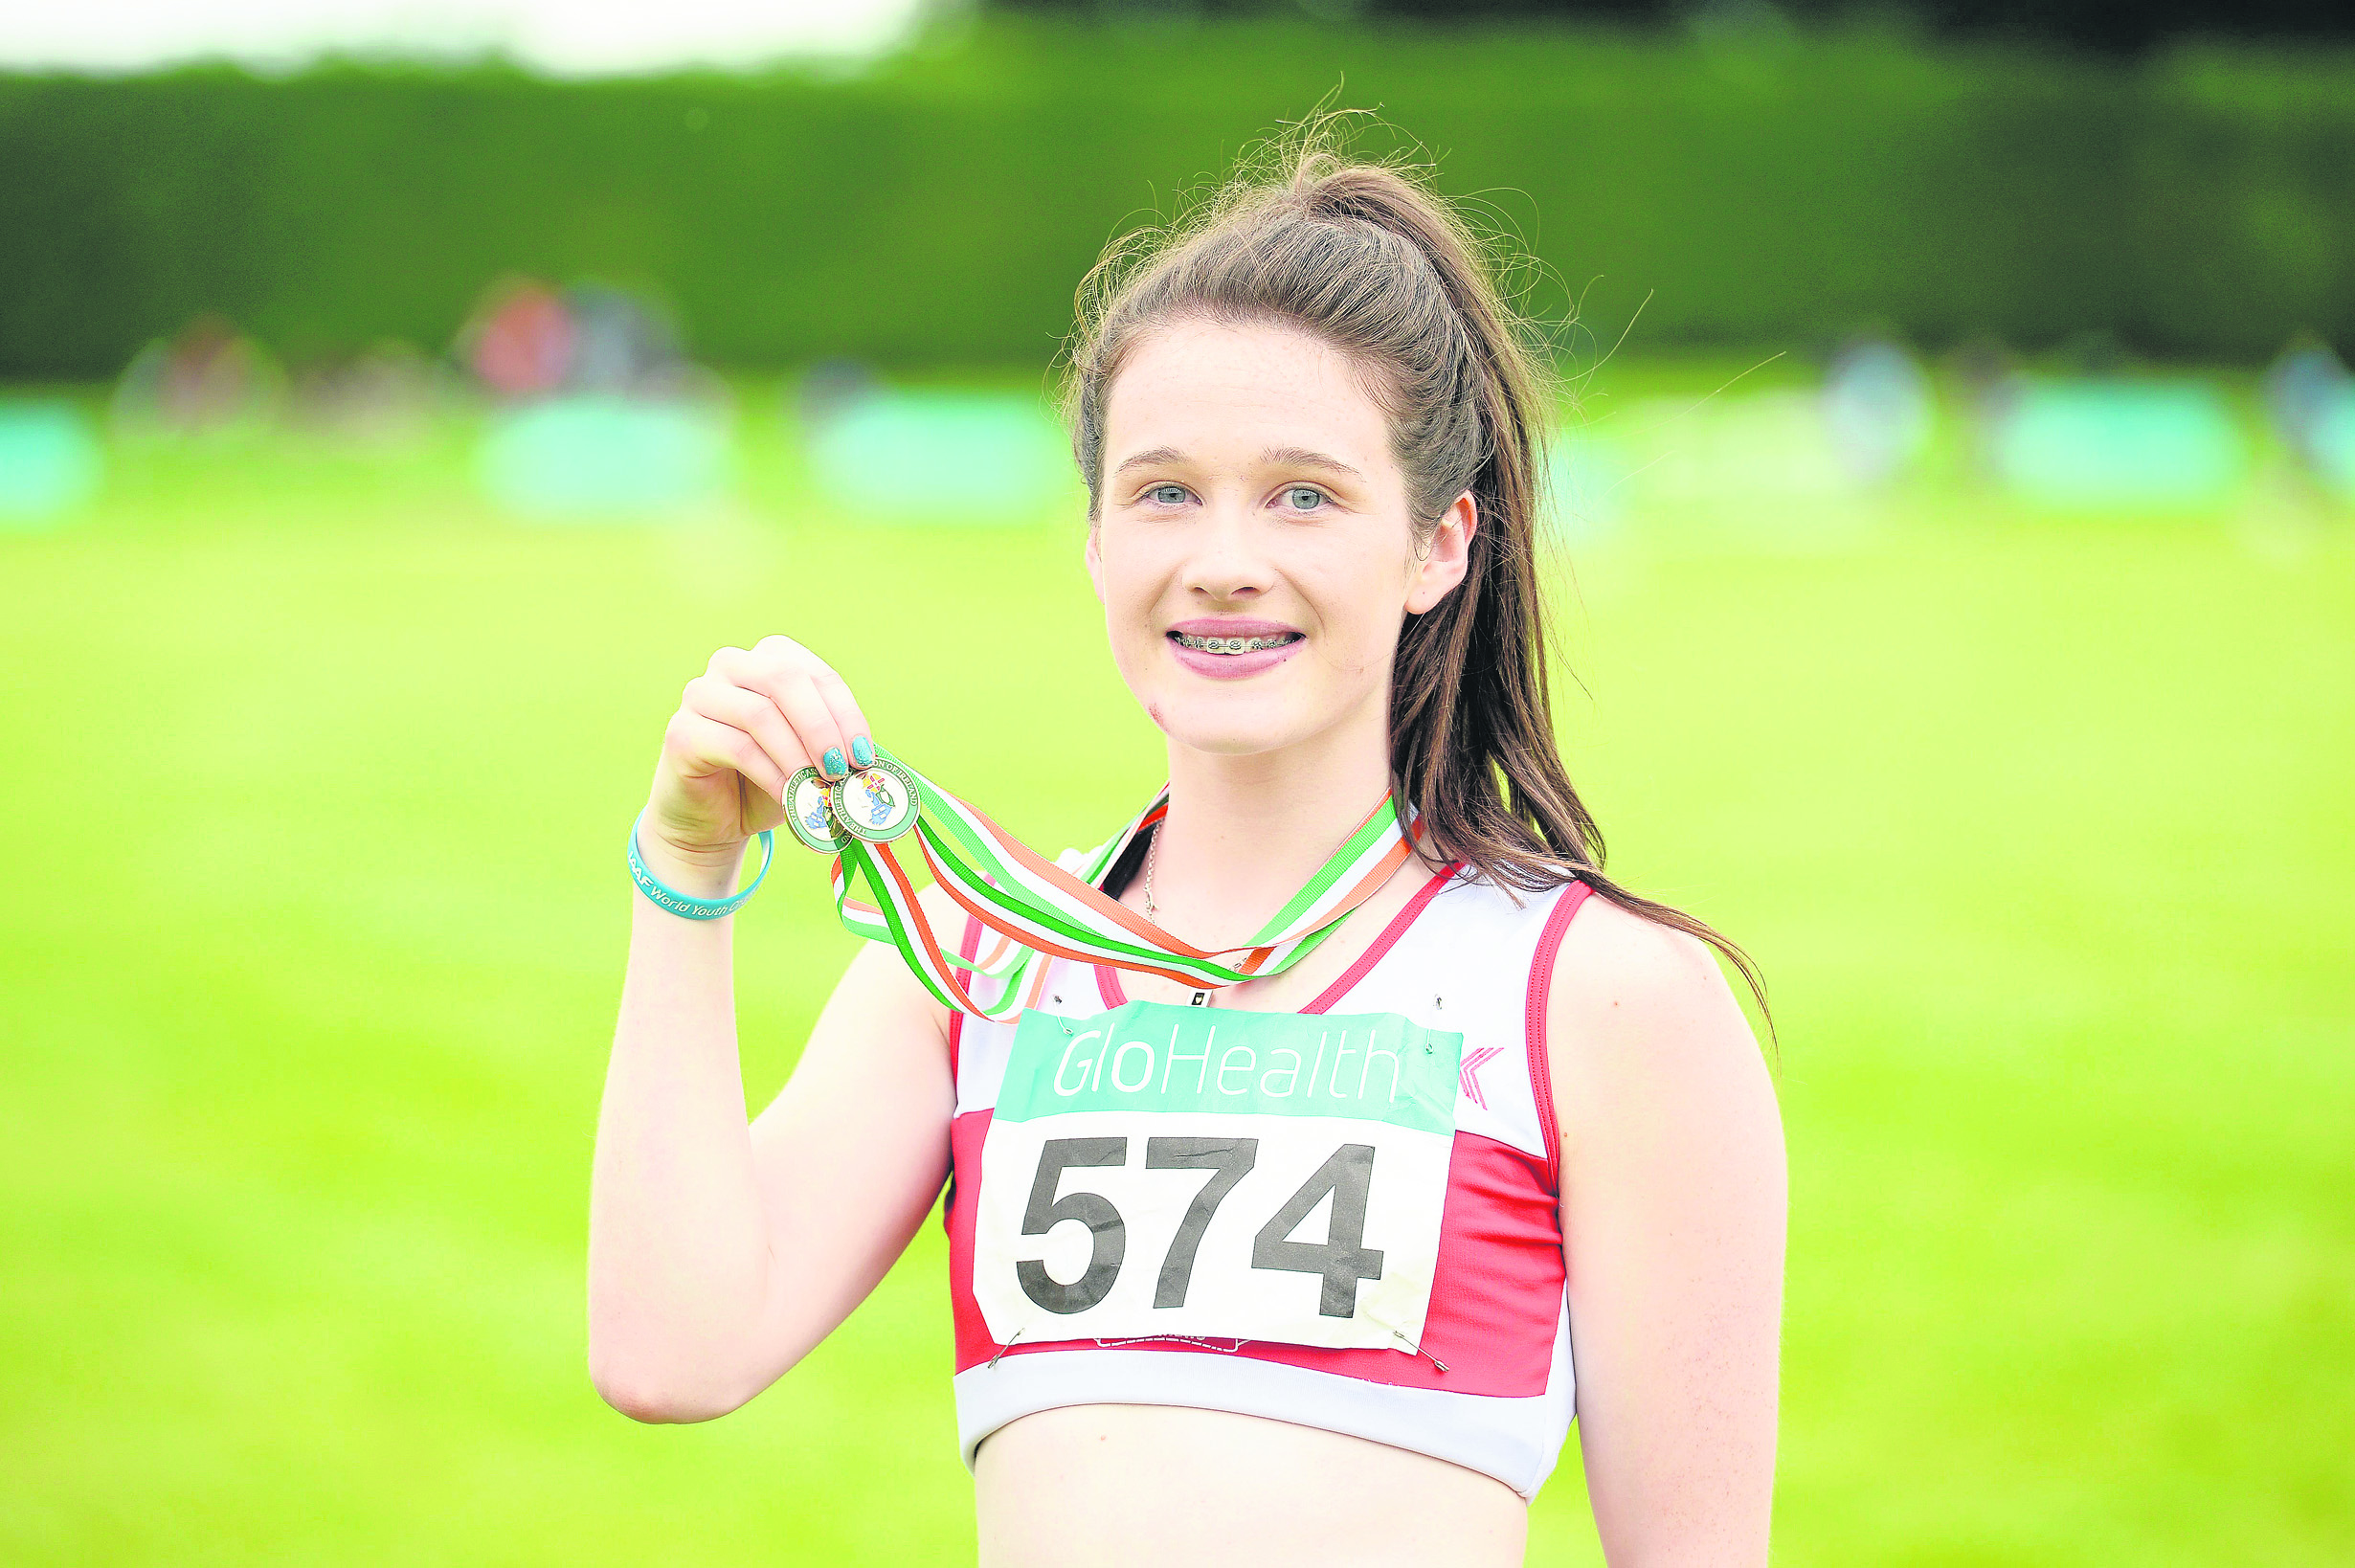 Alanna Lally of Galway City Harriers won two gold medals at the National Track and Field Championships